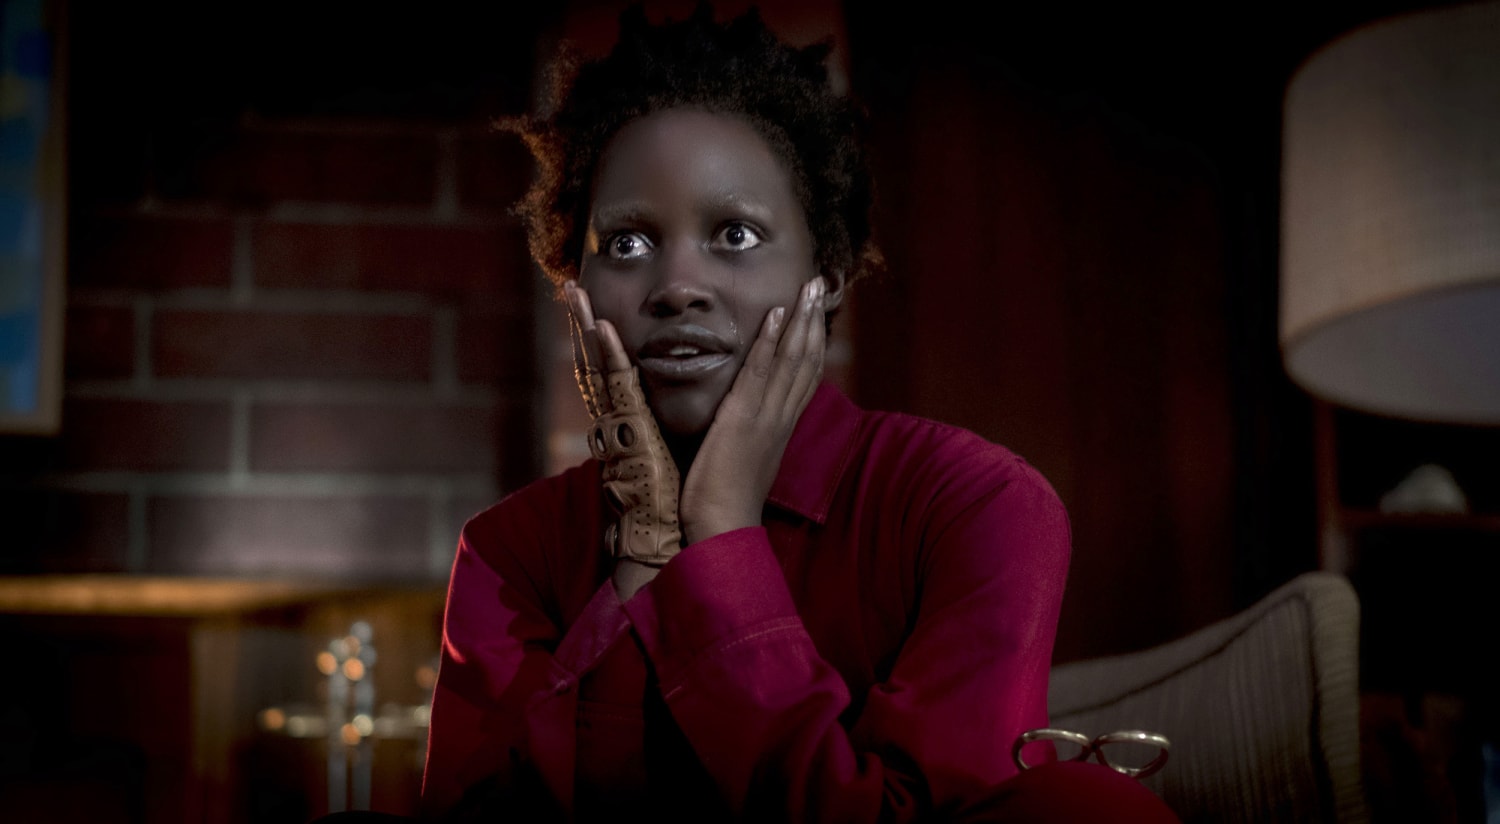 Jordan Peele's 'Us' is everything horror fans want a movie to be:  disturbing, beautiful and impossible to forget